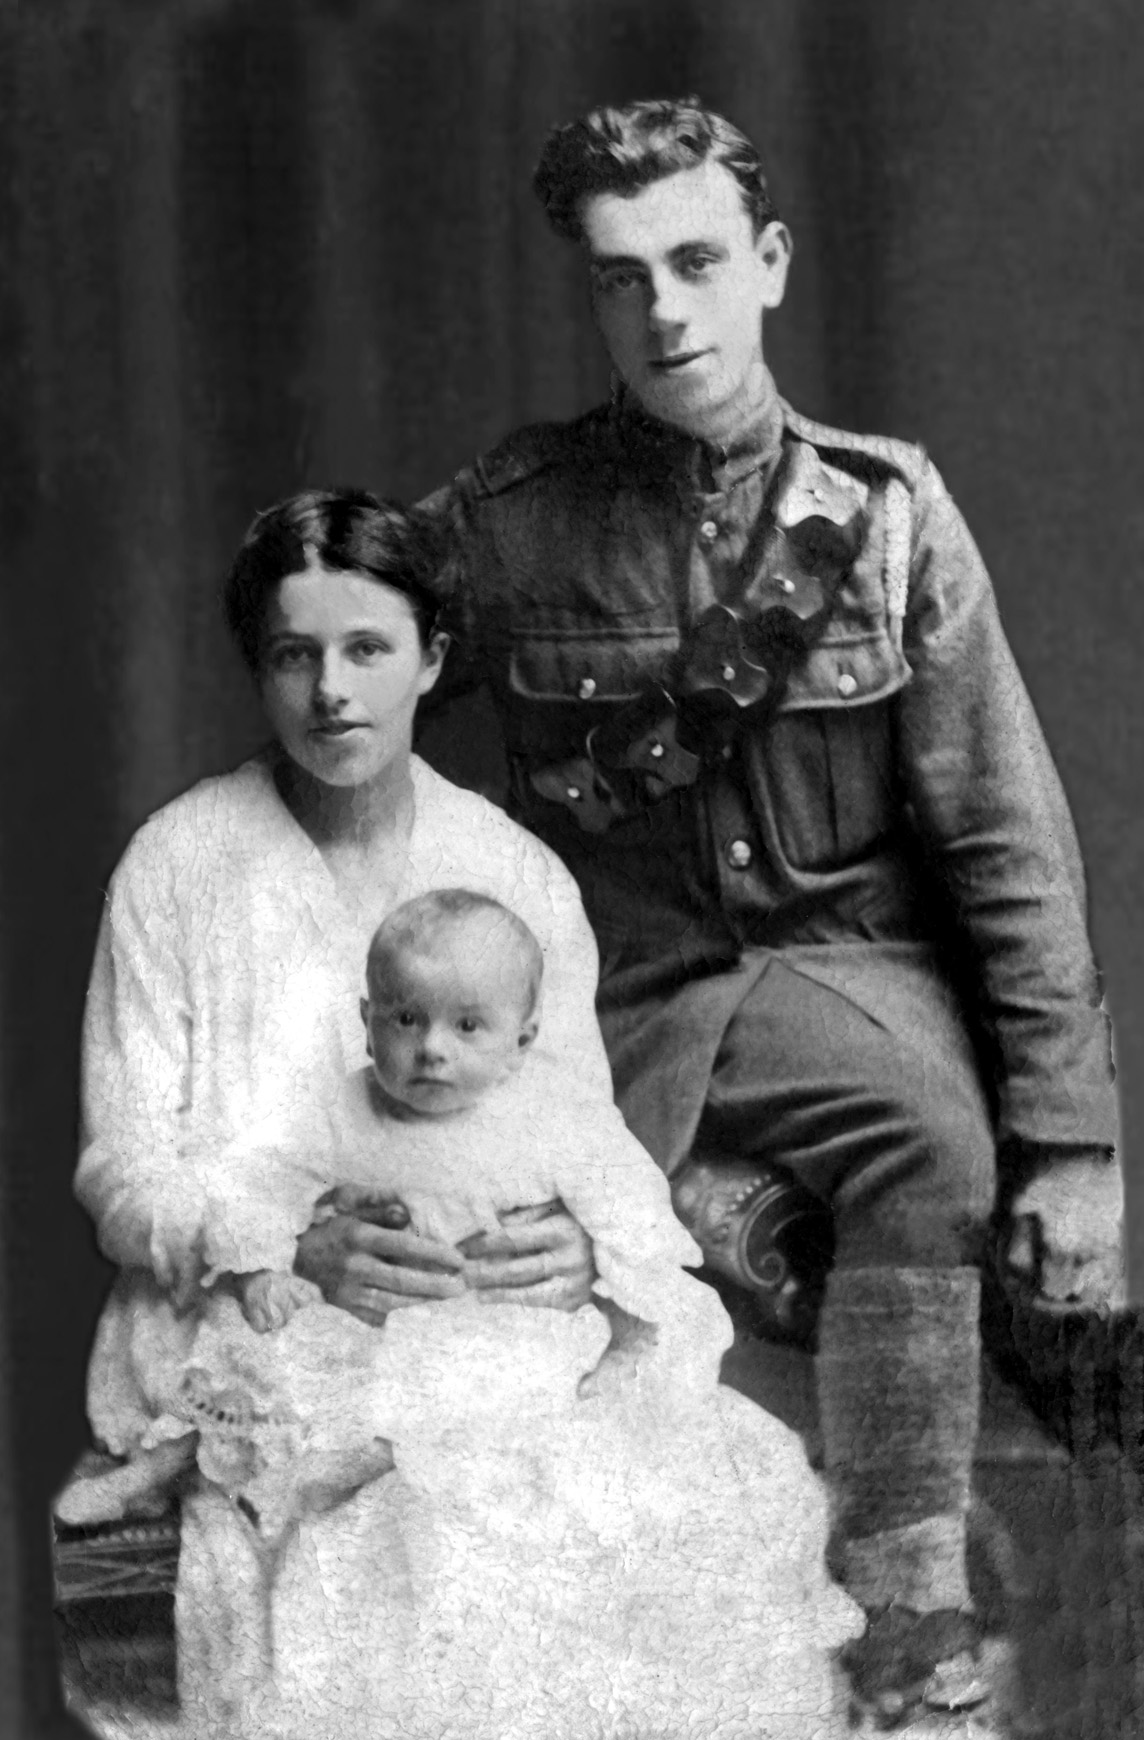 Amy and George with their son (circa 1917)